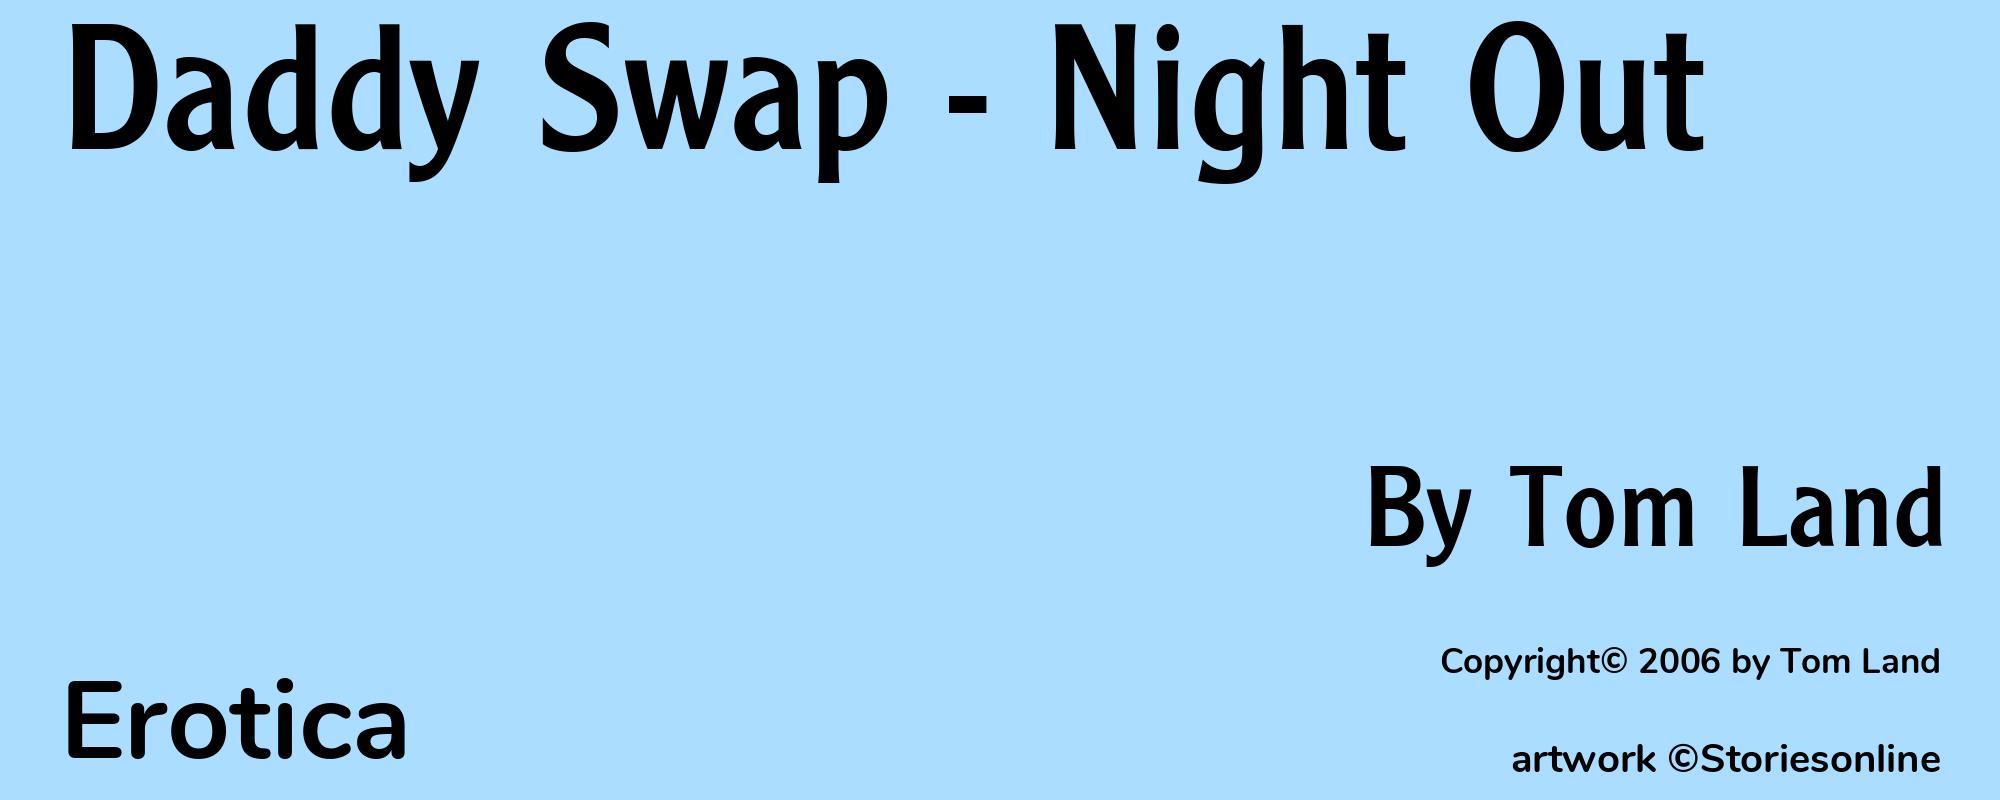 Daddy Swap - Night Out - Cover